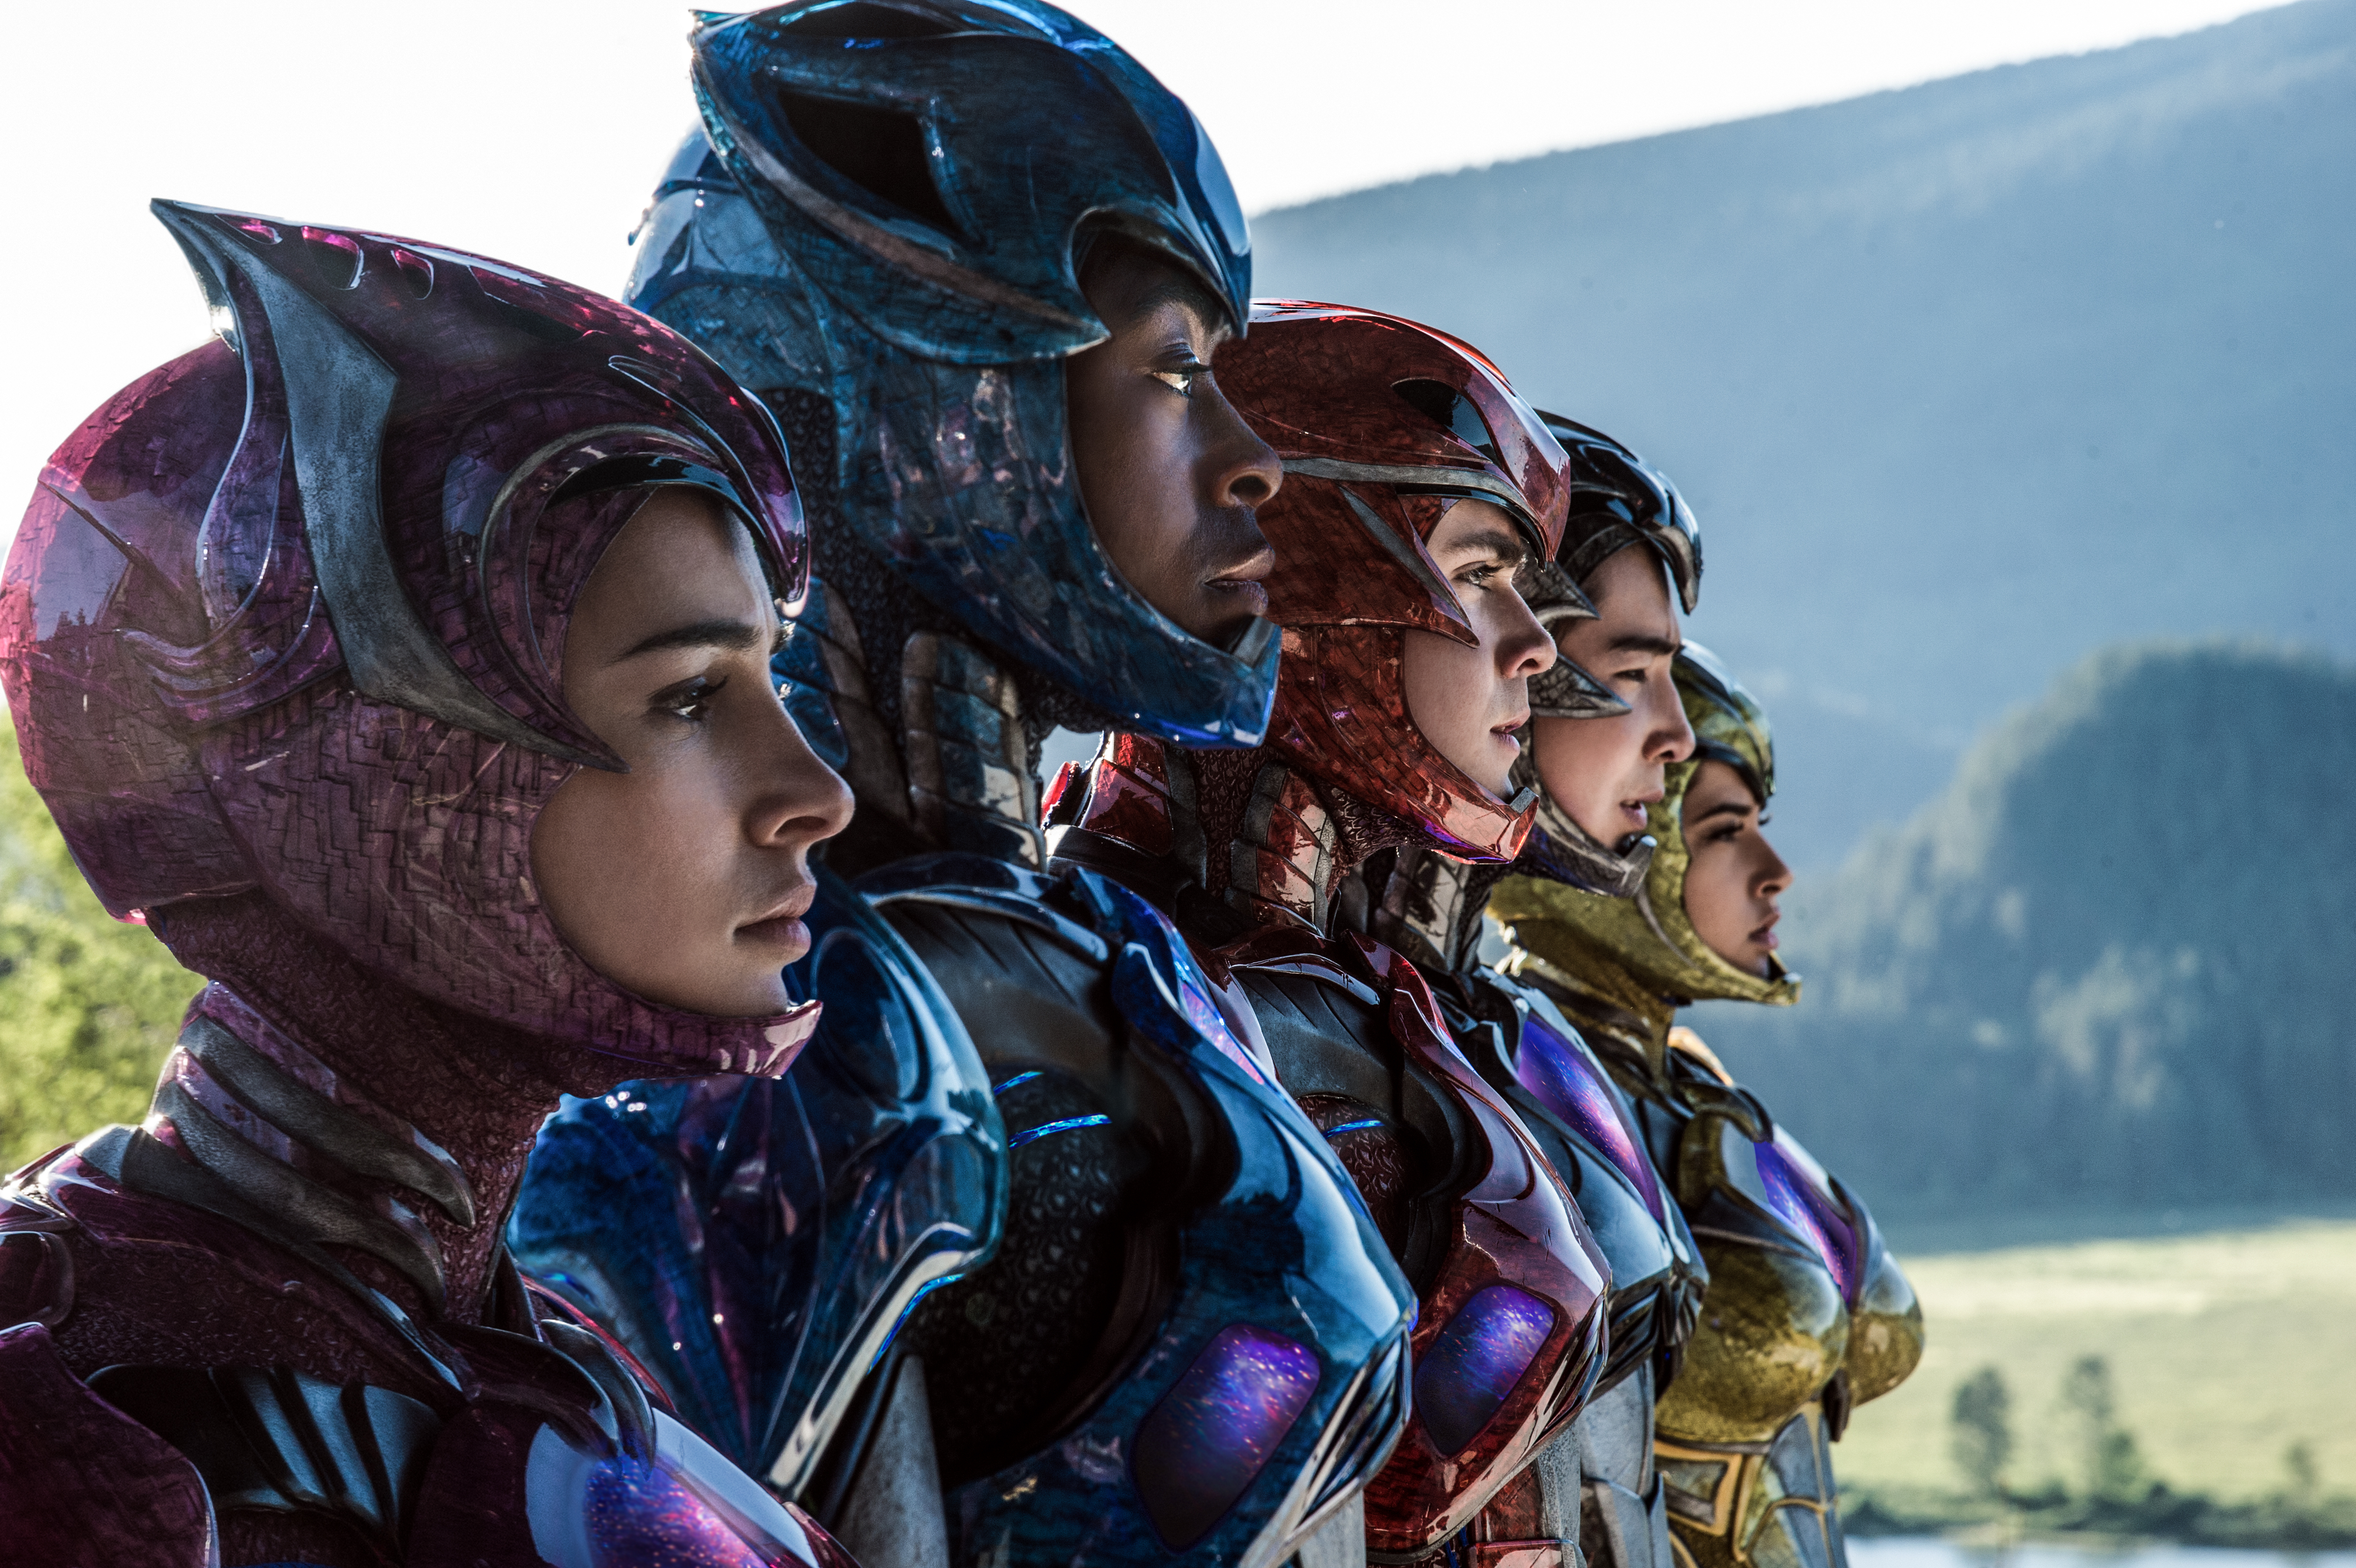 "Power Rangers" (2017) (Kimberley French and Cathay-Keris Films)